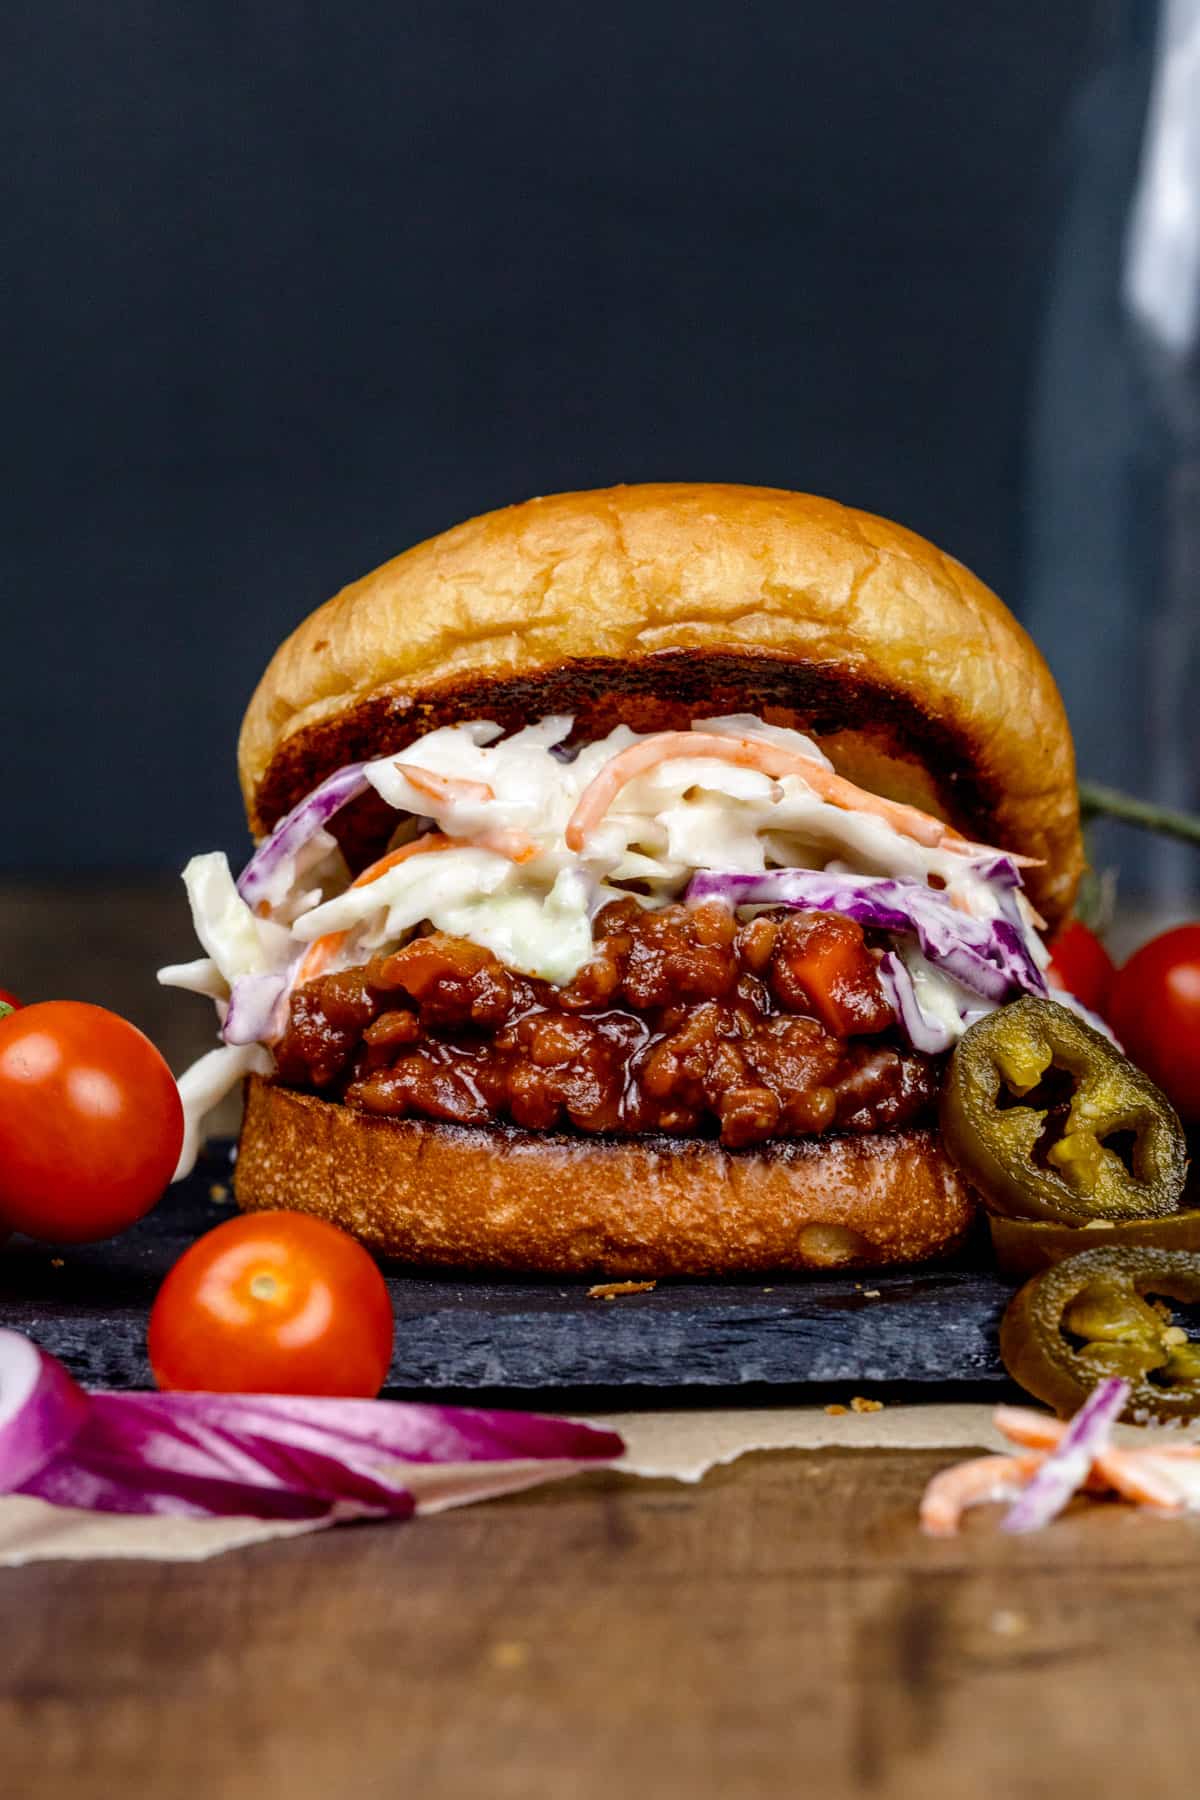 A bbq lentil burger on a dark slate serving tray. The bun is tilted back and you can see the coleslaw on top of the lentils. tiny tomatoes, pickles jalapeños, and red onion slices are next to the burger.